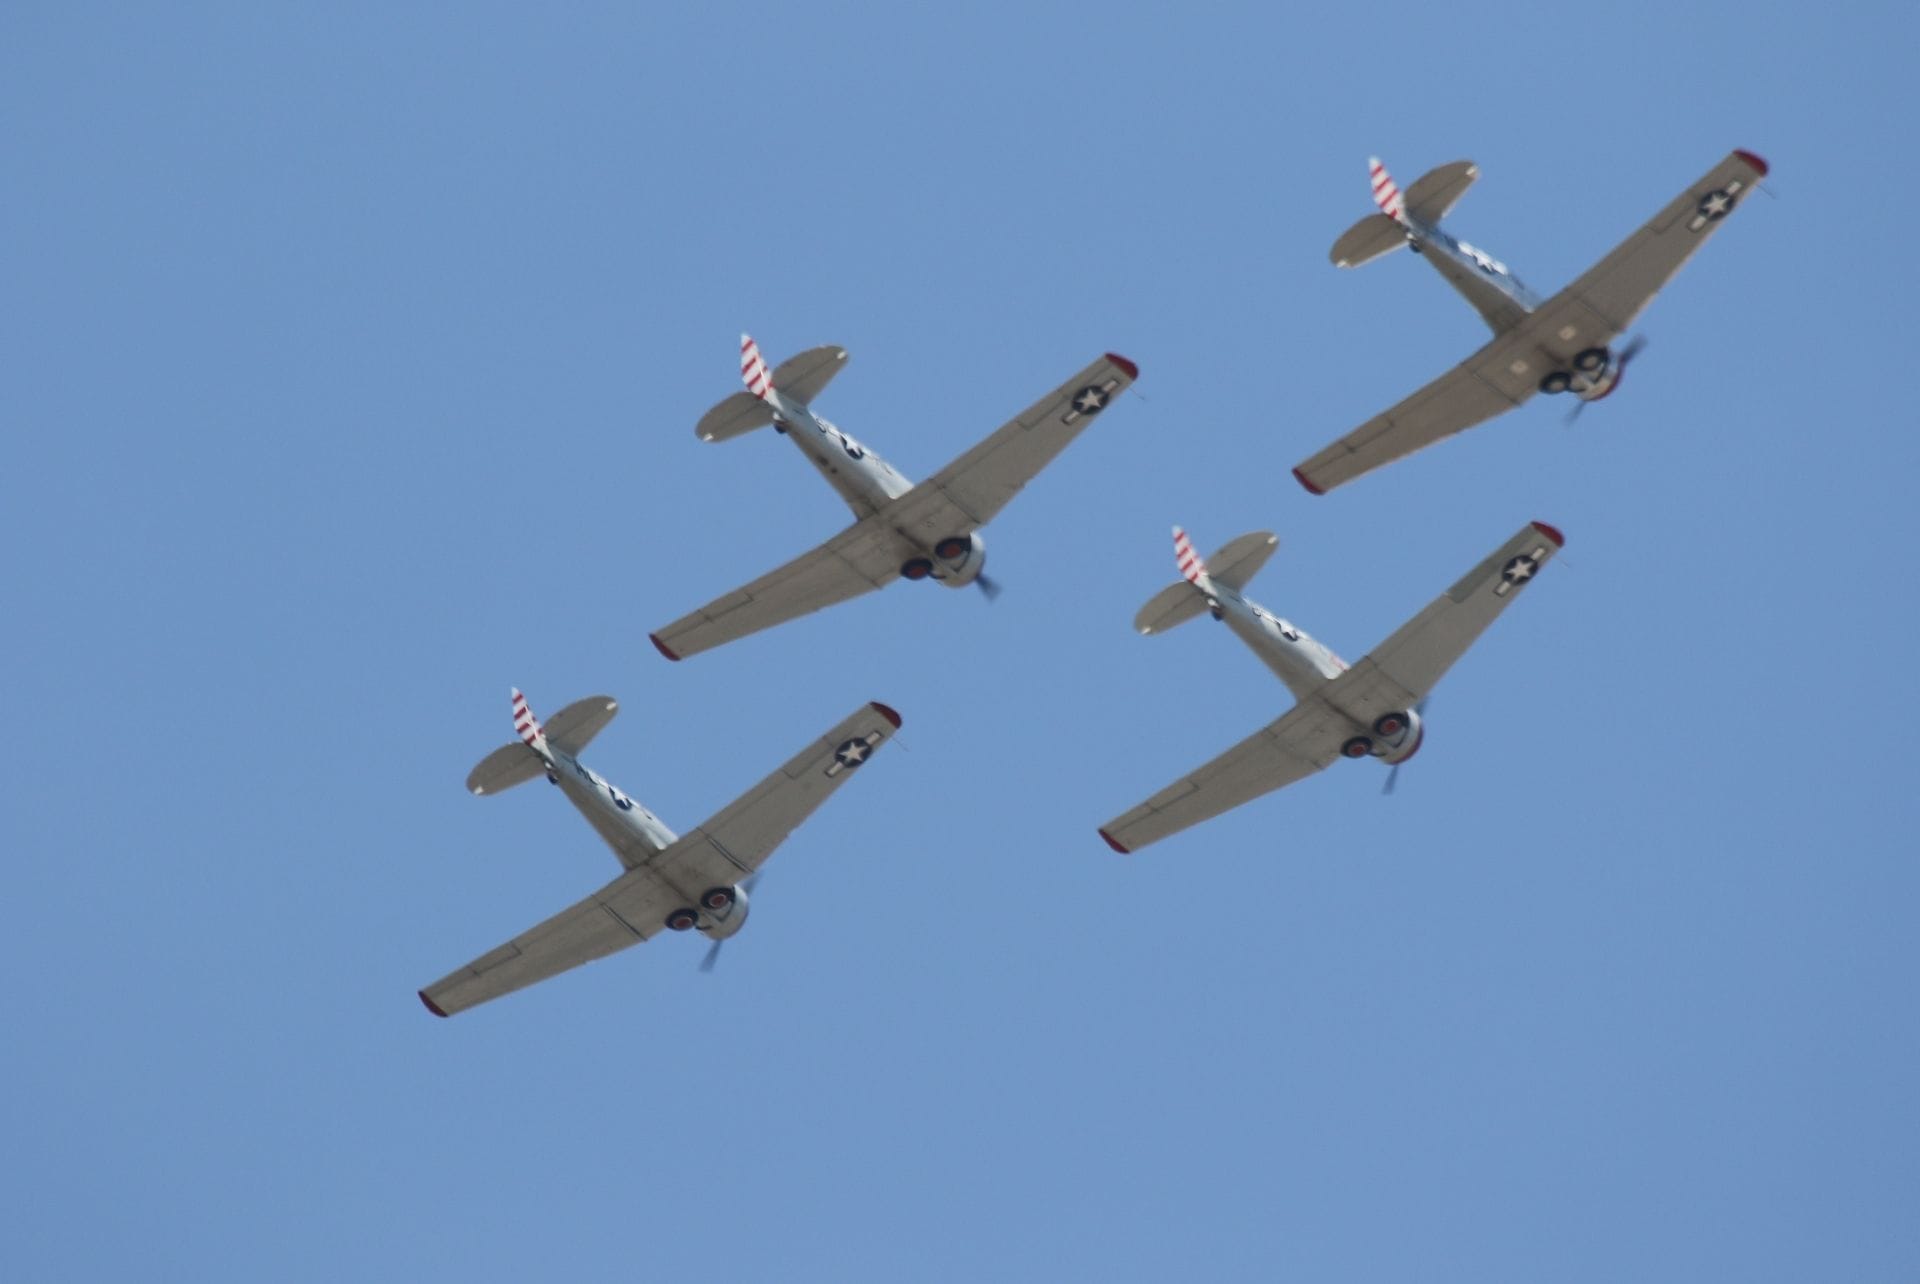 Formation Flying - Wings Over Camarillo